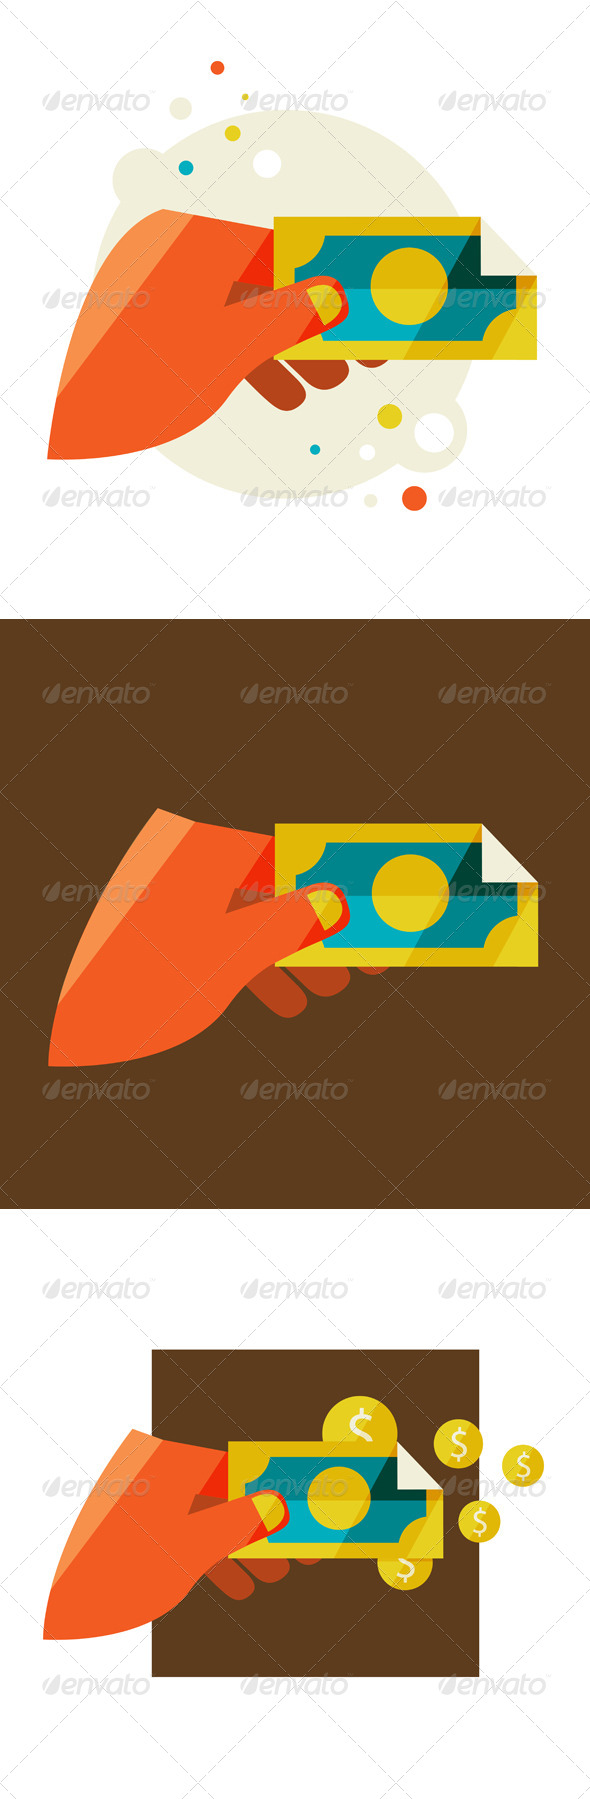 GraphicRiver Man s Hand Holding a Banknote 6966128